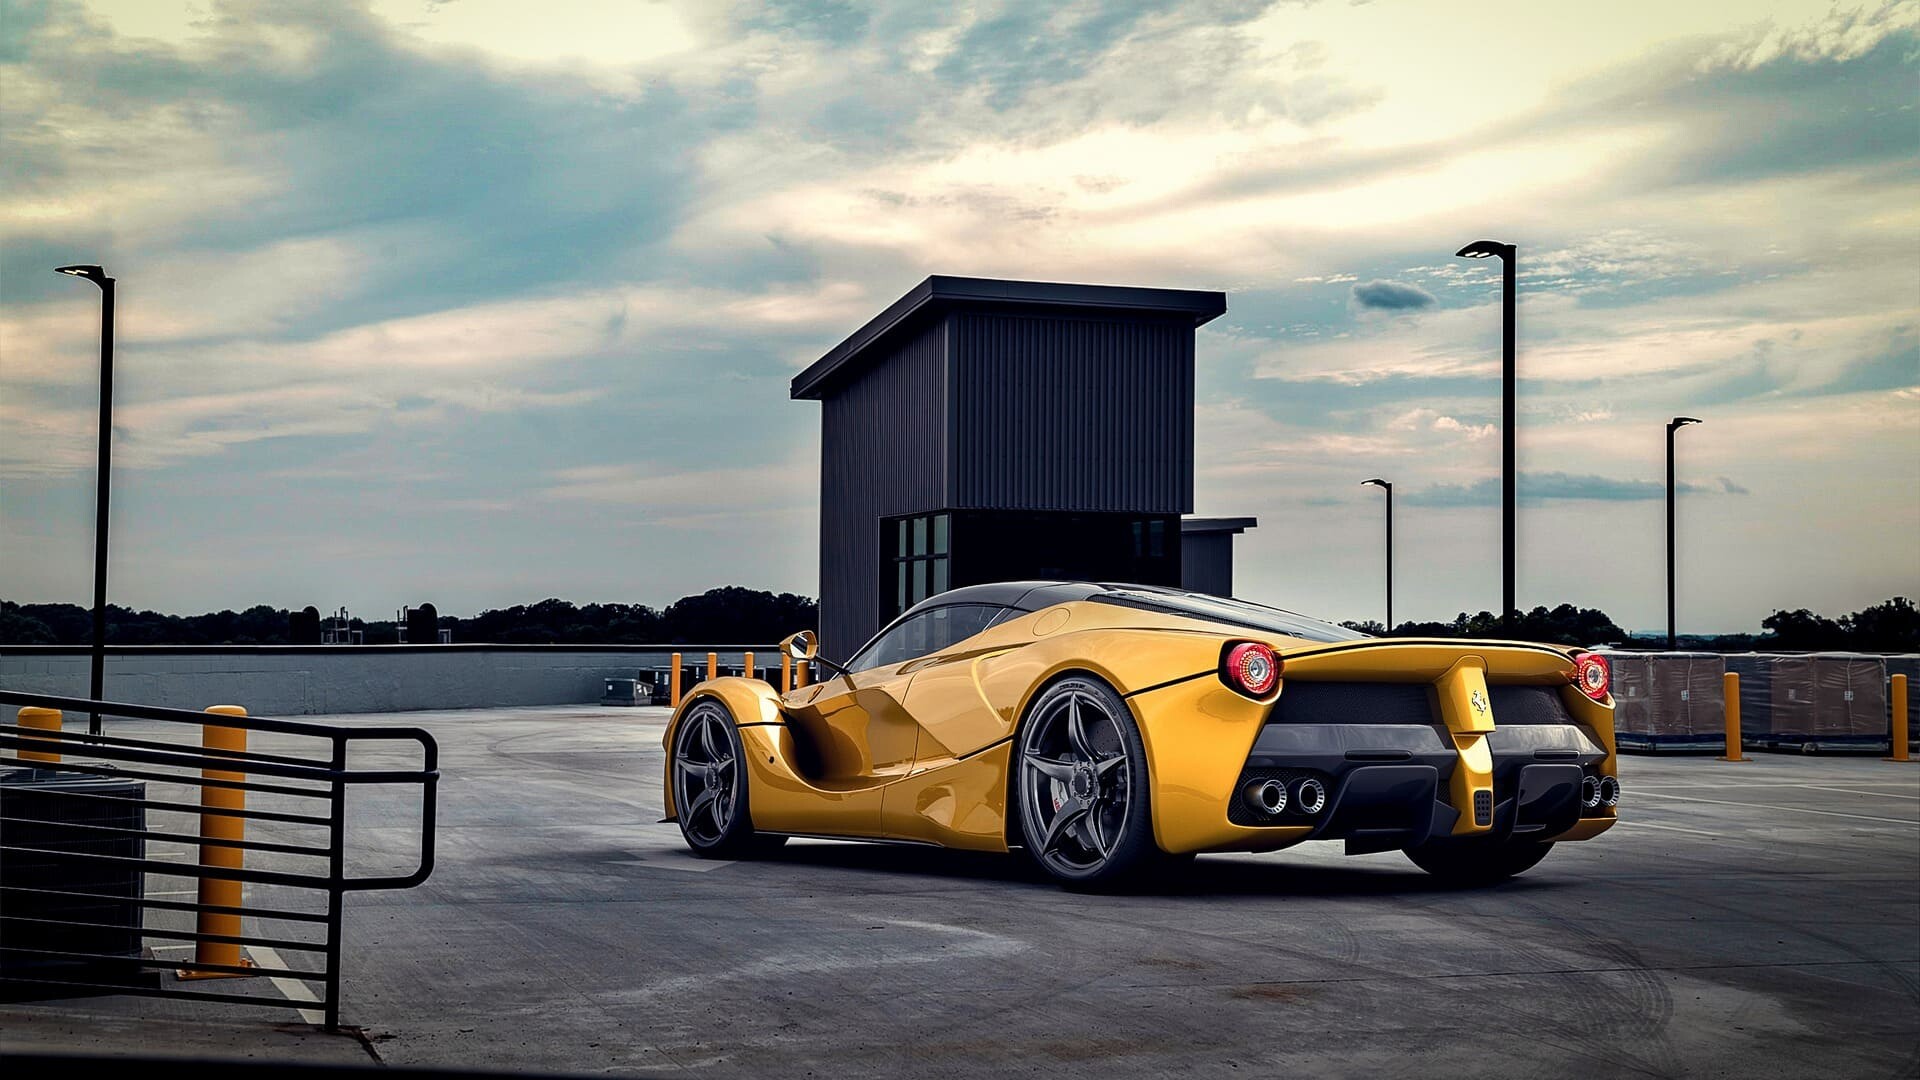 Ferrari: F150, Only 499 units were produced, and each cost more than 1 million Euros. 1920x1080 Full HD Wallpaper.